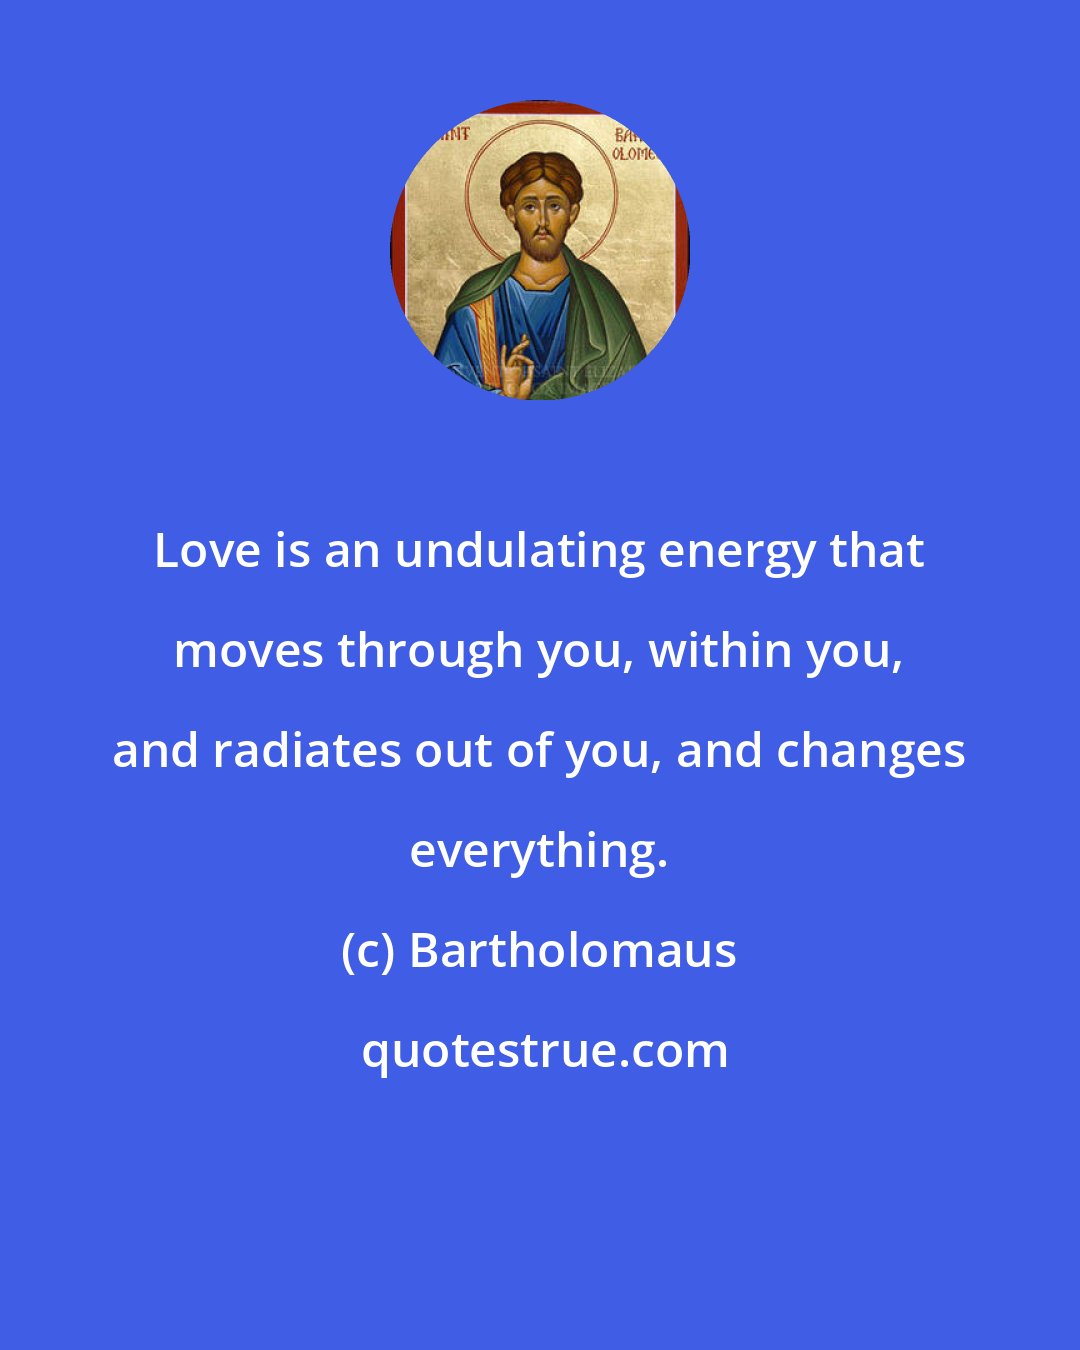 Bartholomaus: Love is an undulating energy that moves through you, within you, and radiates out of you, and changes everything.